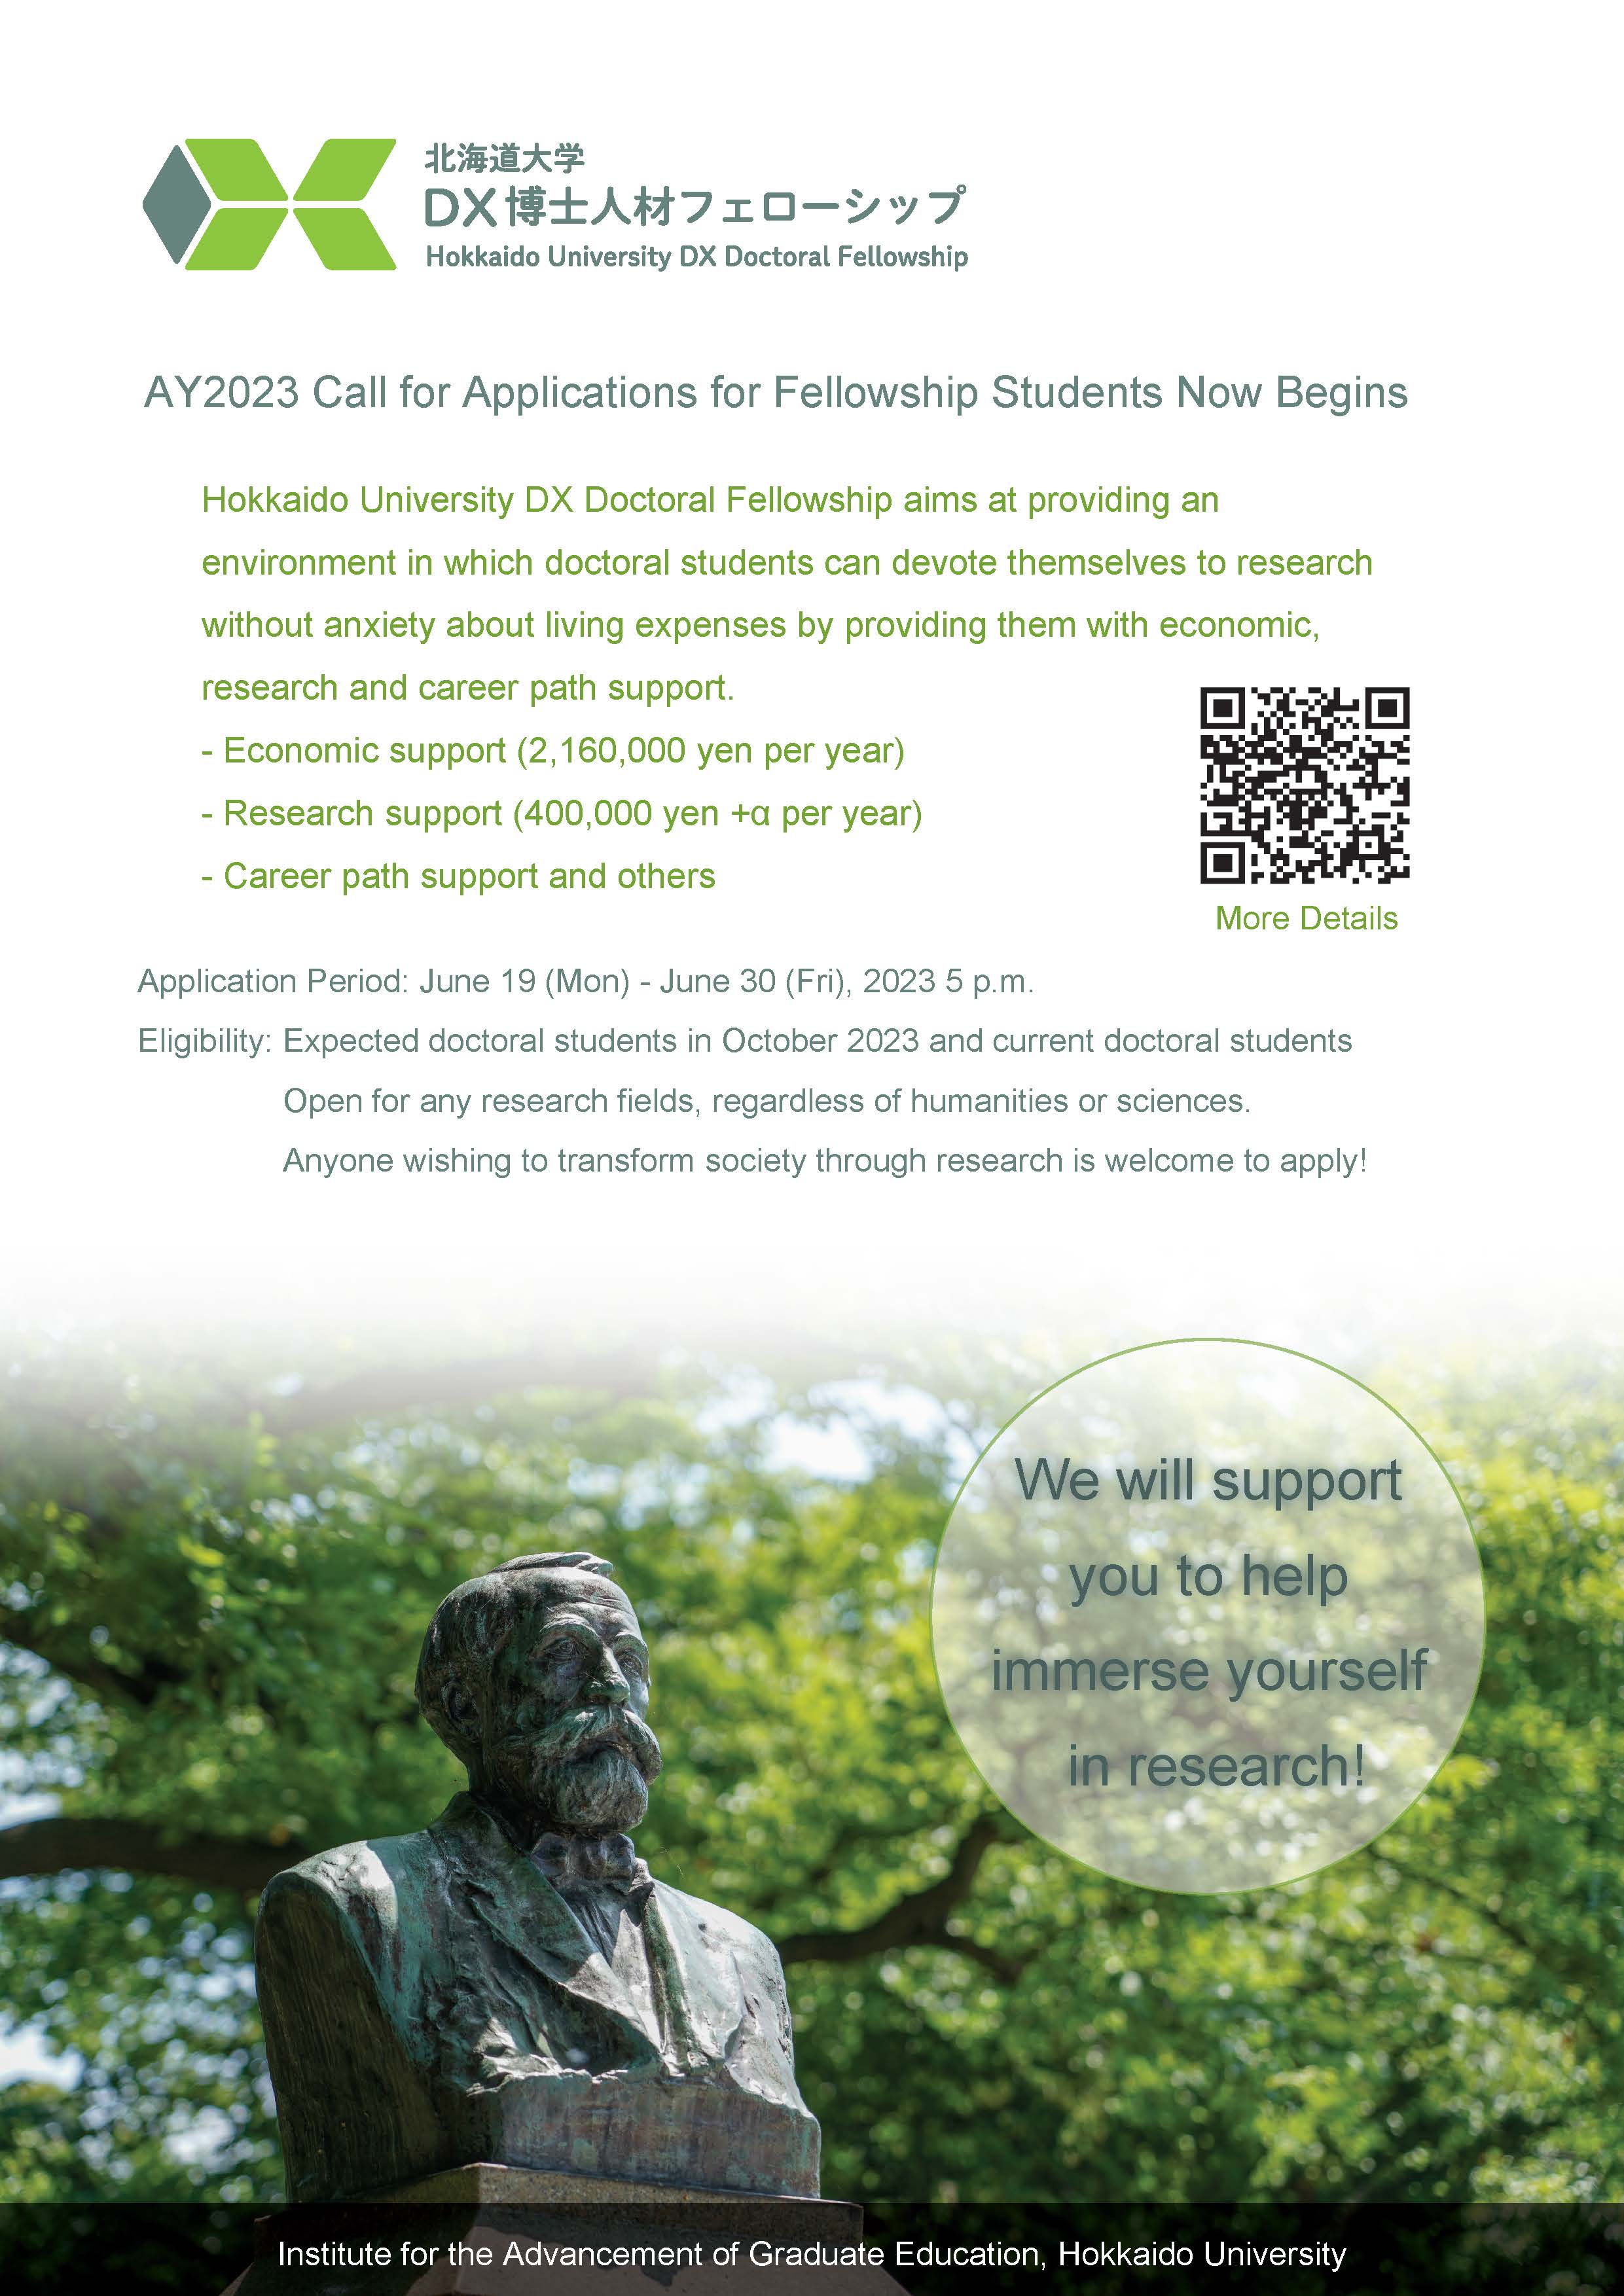 DX Doctoral Fellowship